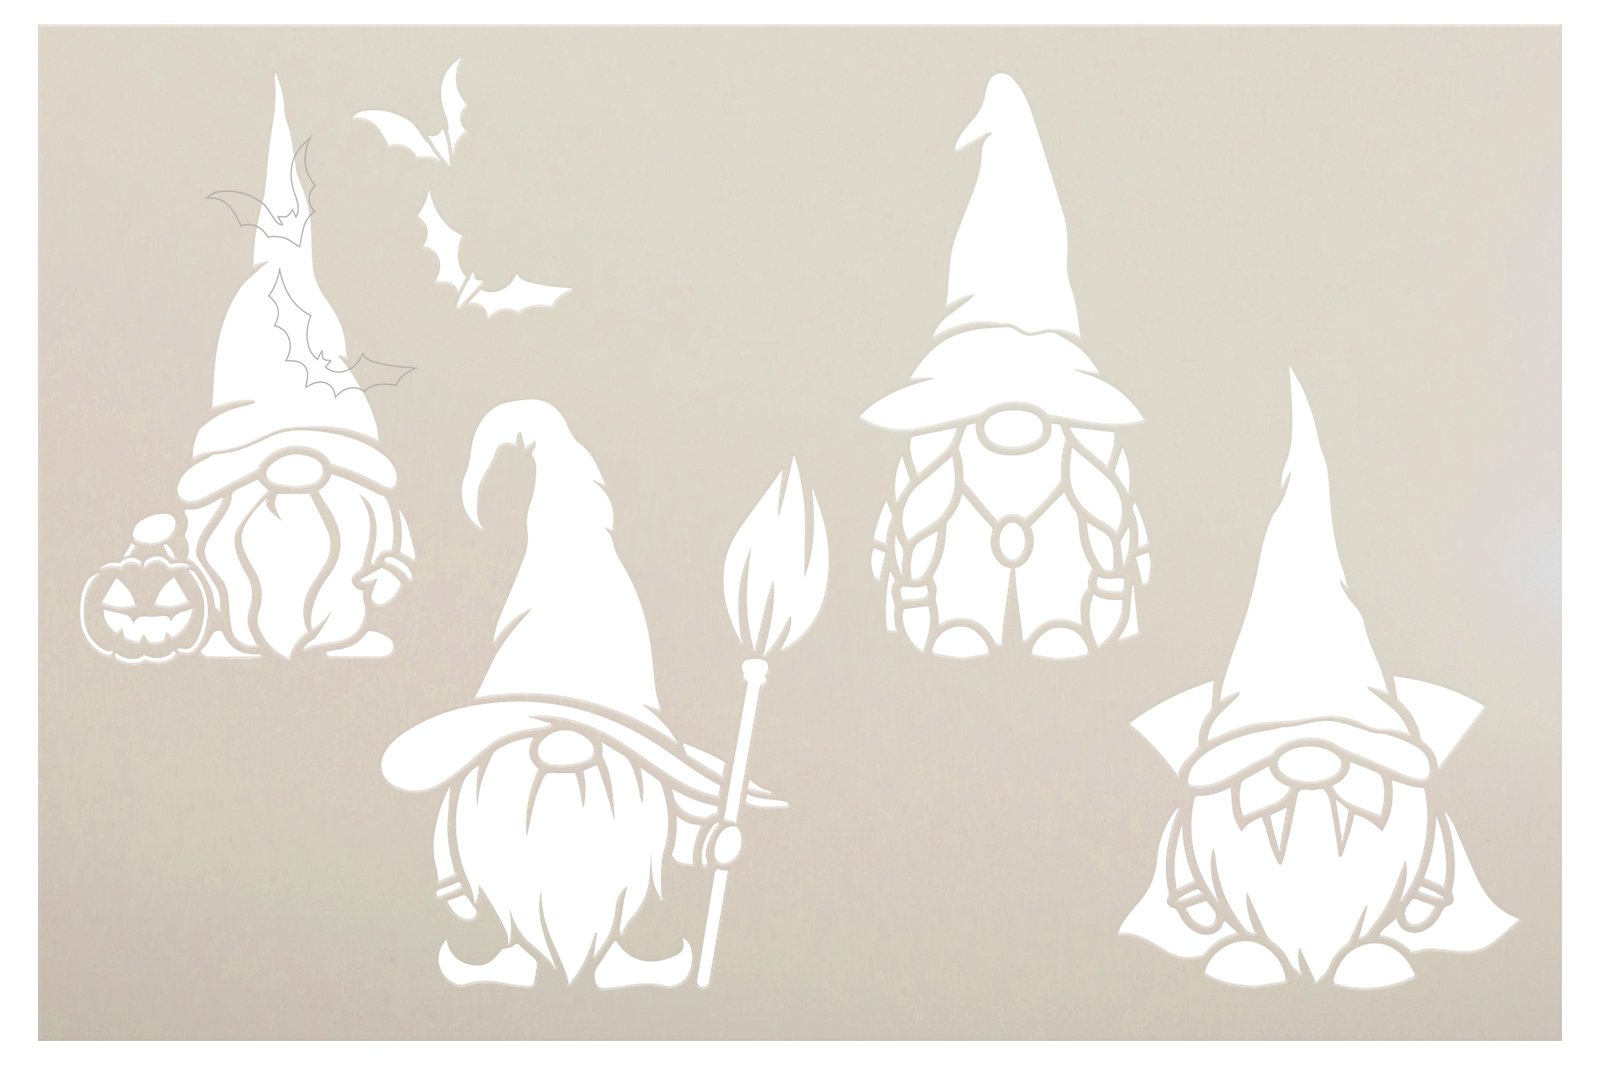 Witch & Vampire Halloween Gnomes Stencil by StudioR12 - Select Size - USA Made - Craft DIY Autumn Home Decor | Paint Fall Porch Wood Sign - Pallet